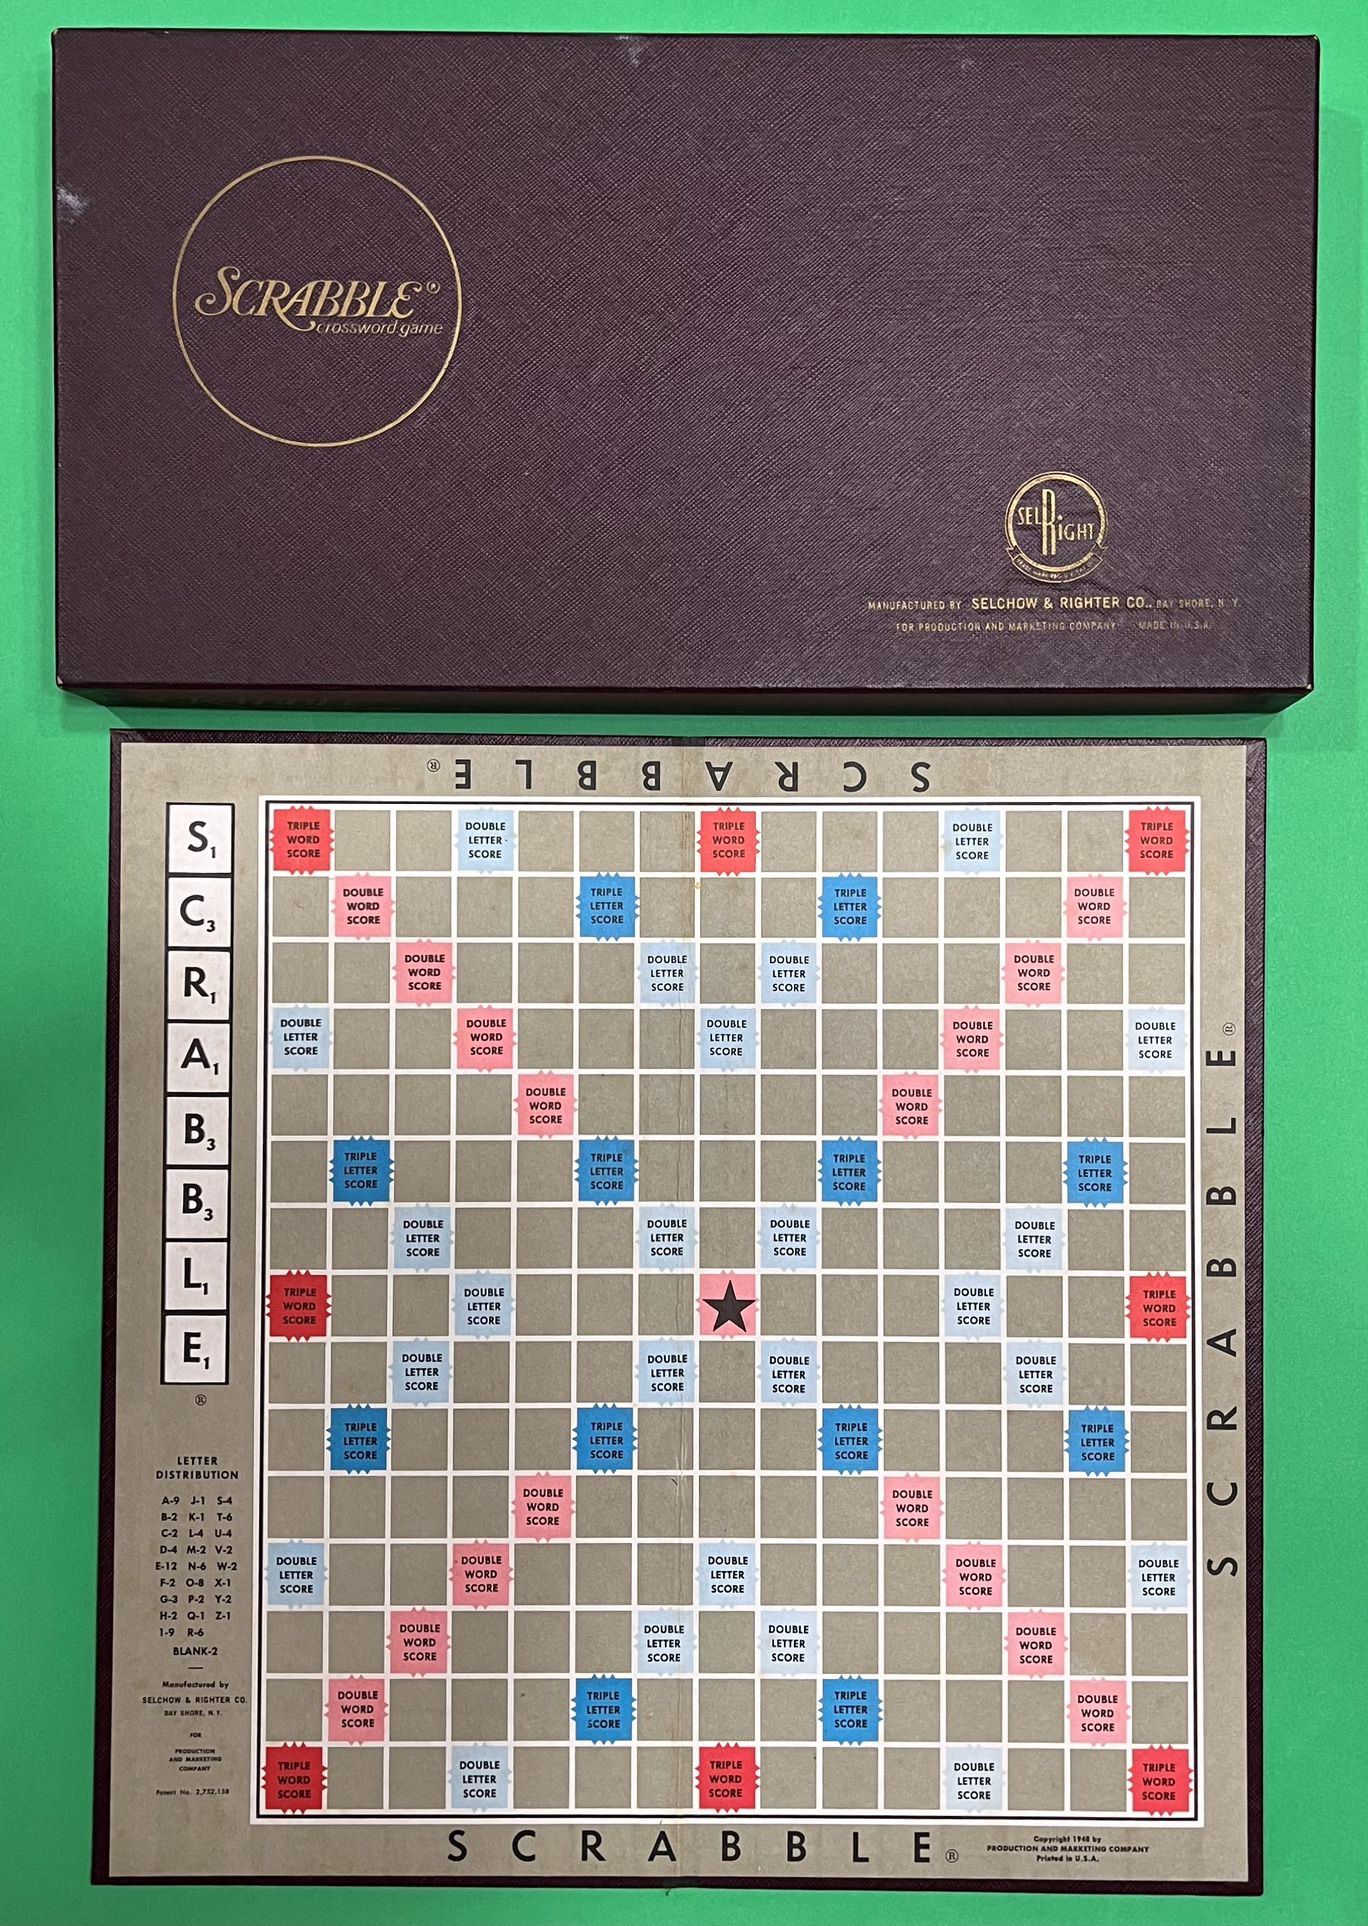 Vintage Scrabble Crossword Bd Game by Selchow & Righter Co. (circa late 60’s)